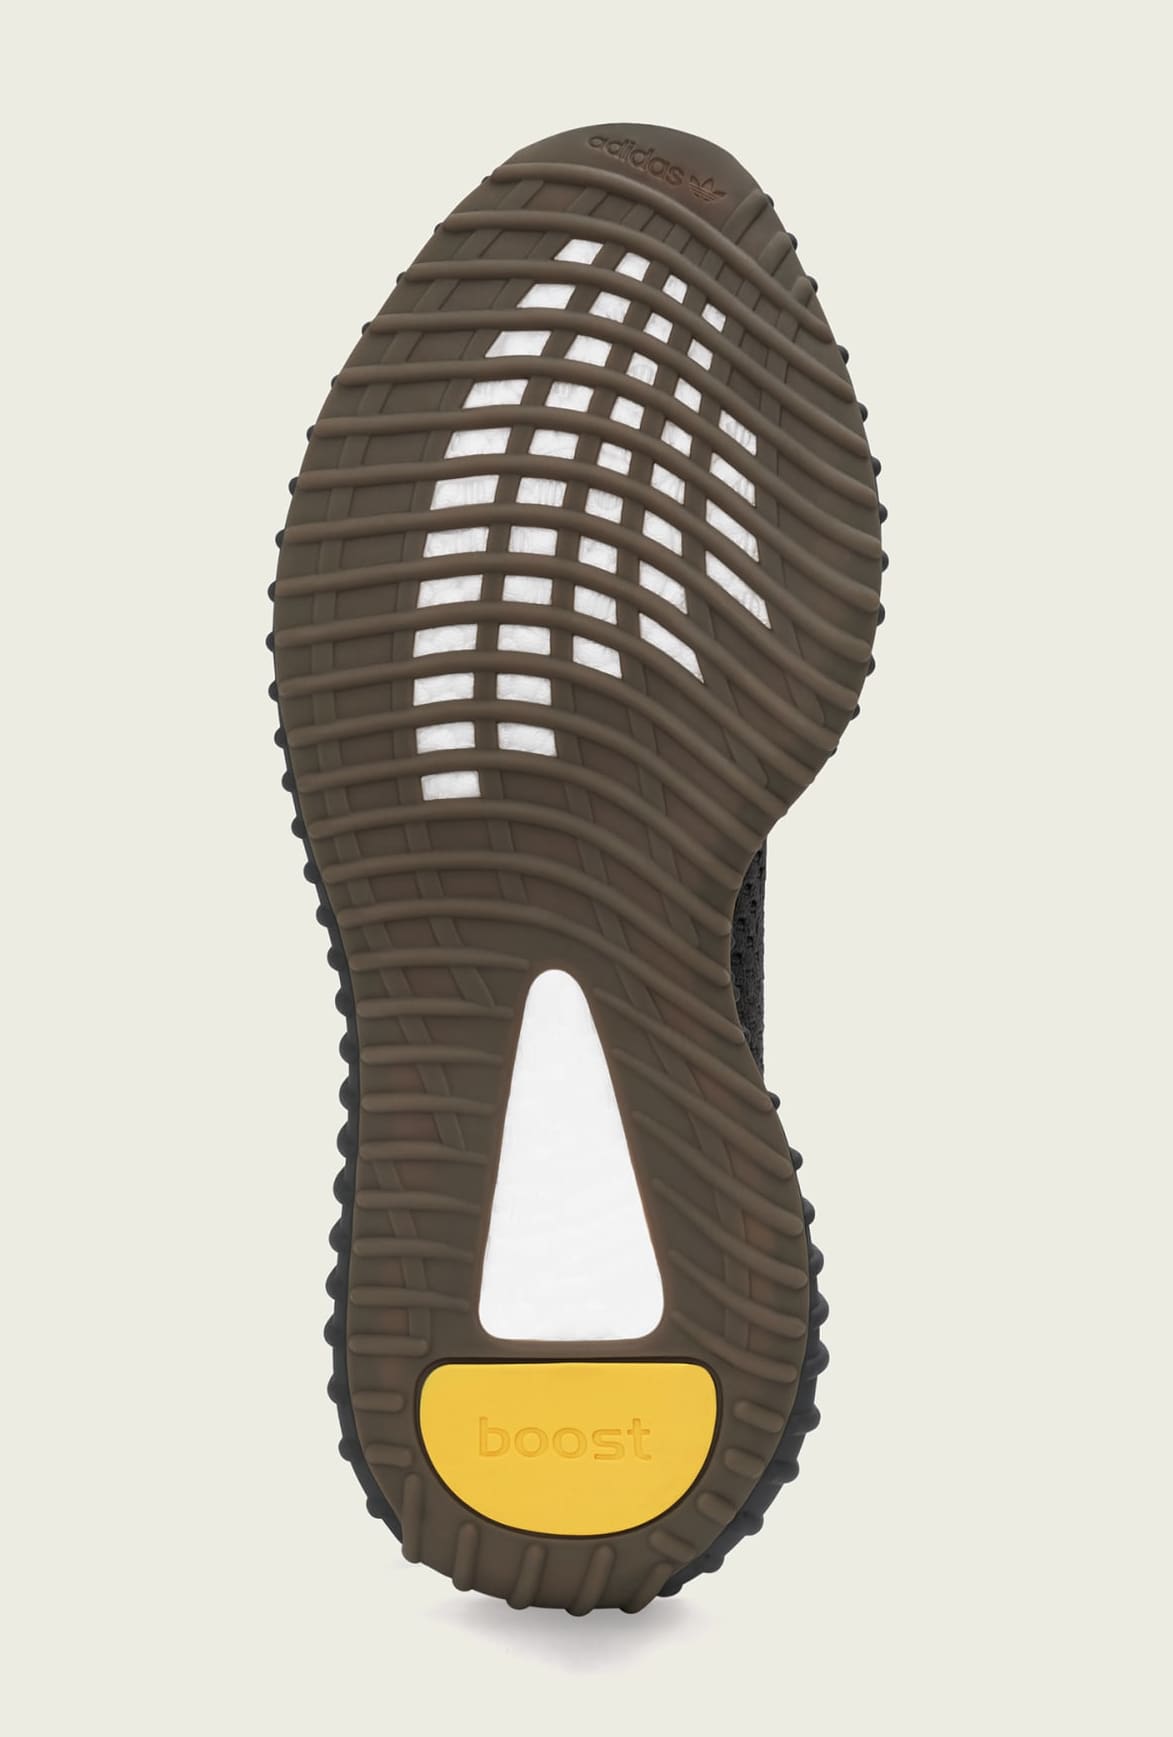 Adidas Yeezy Boost 350 V2 &#x27;Cinder&#x27; FY2903 Outsole